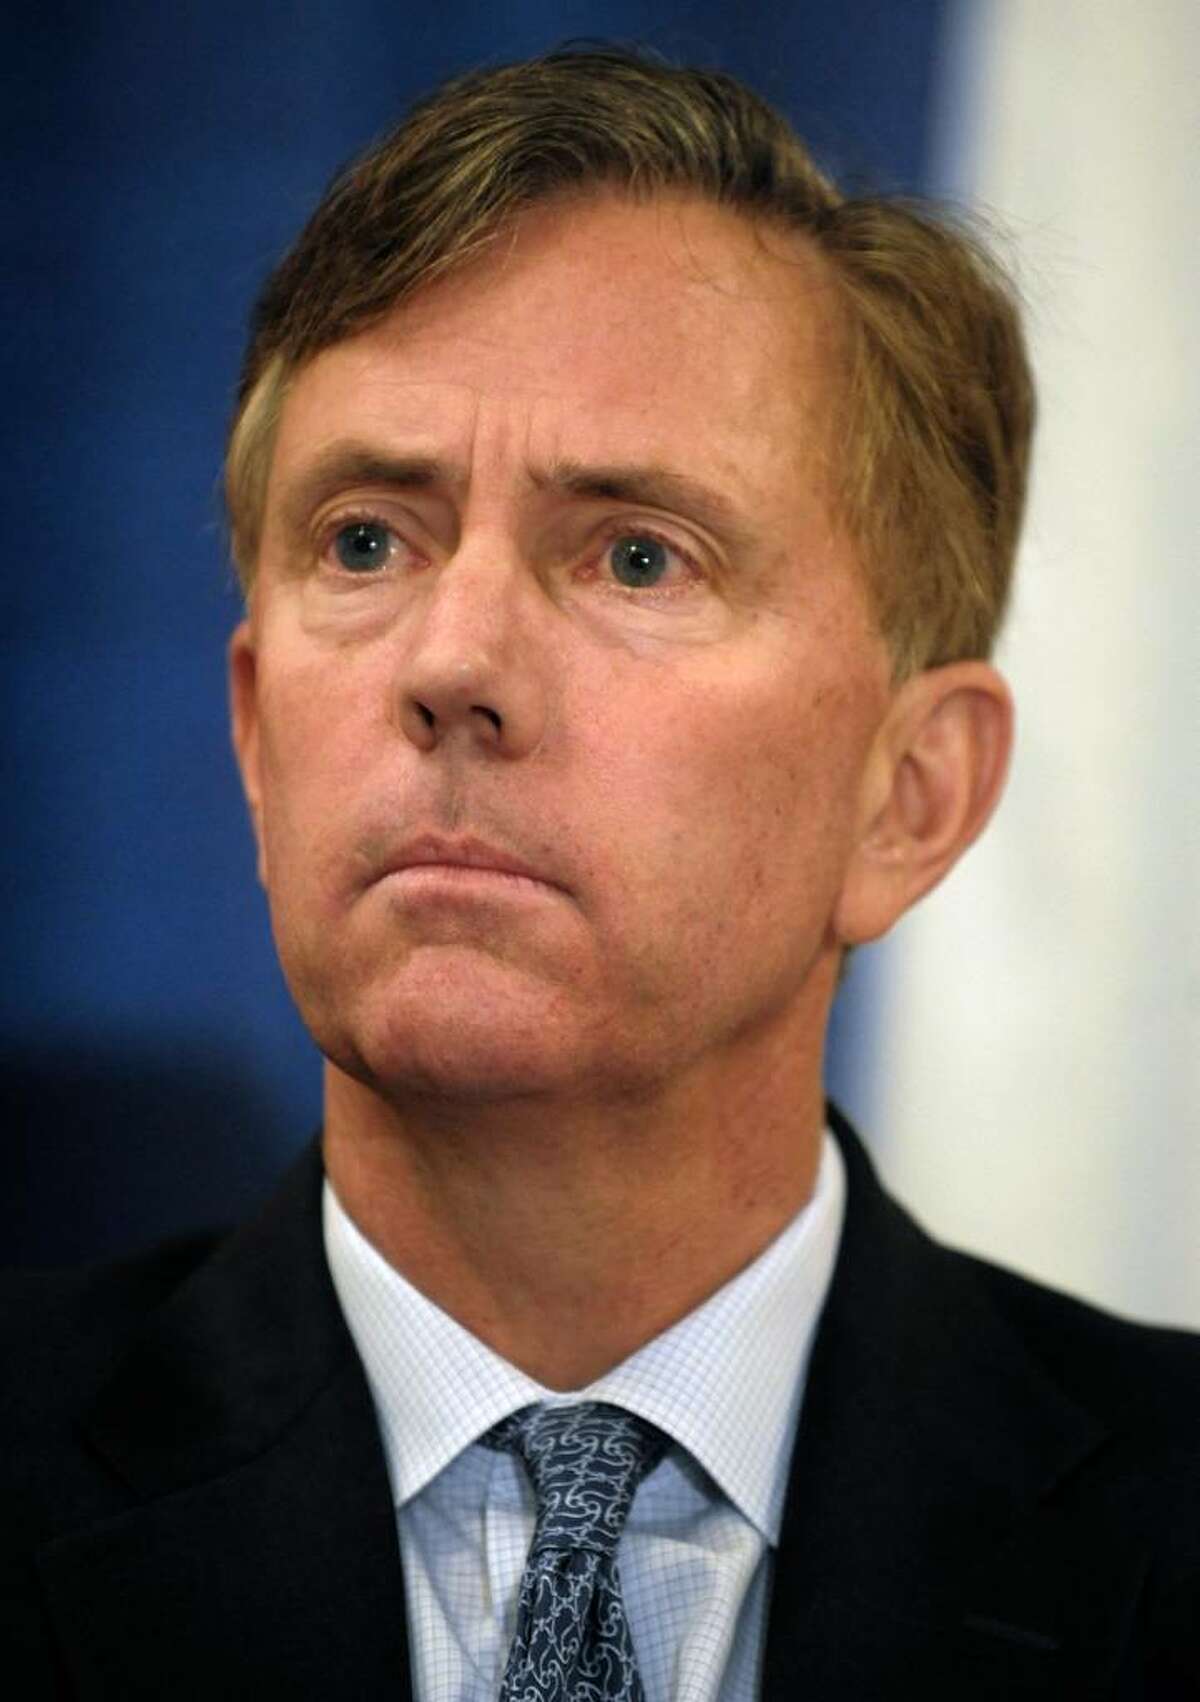 Ned Lamont, Democratic candidate for Governor of Connecticut.